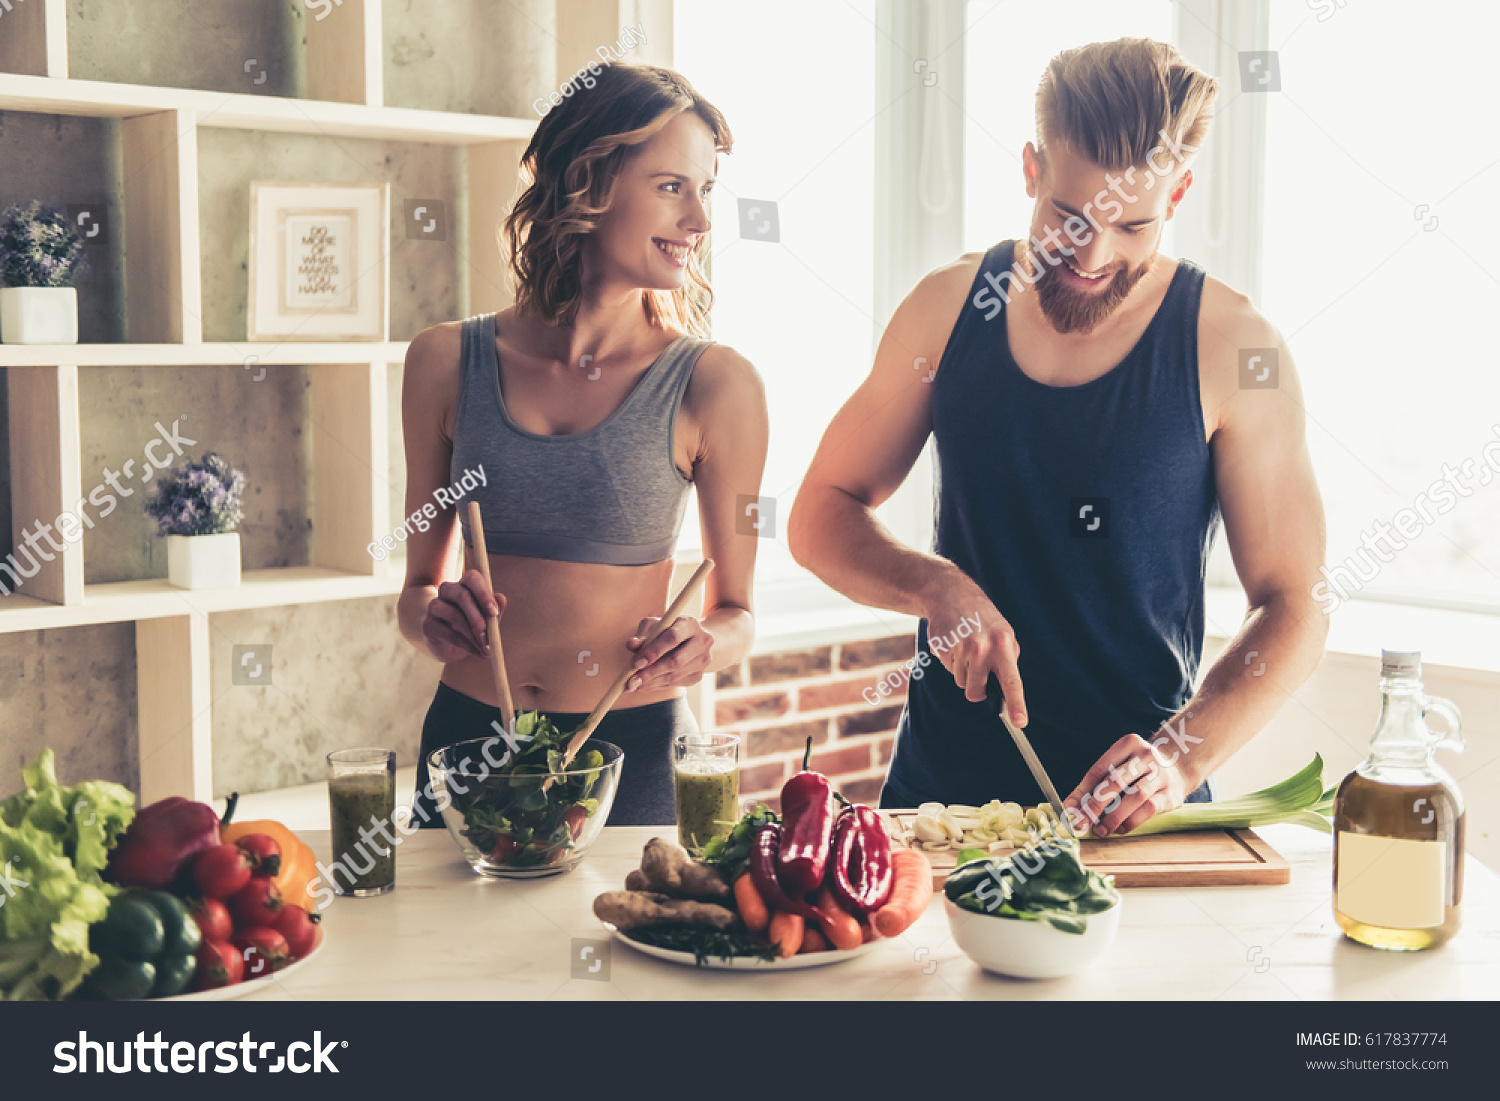 Beautiful young sports people are talking and smiling while cooking healthy food in kitchen at home #617837774